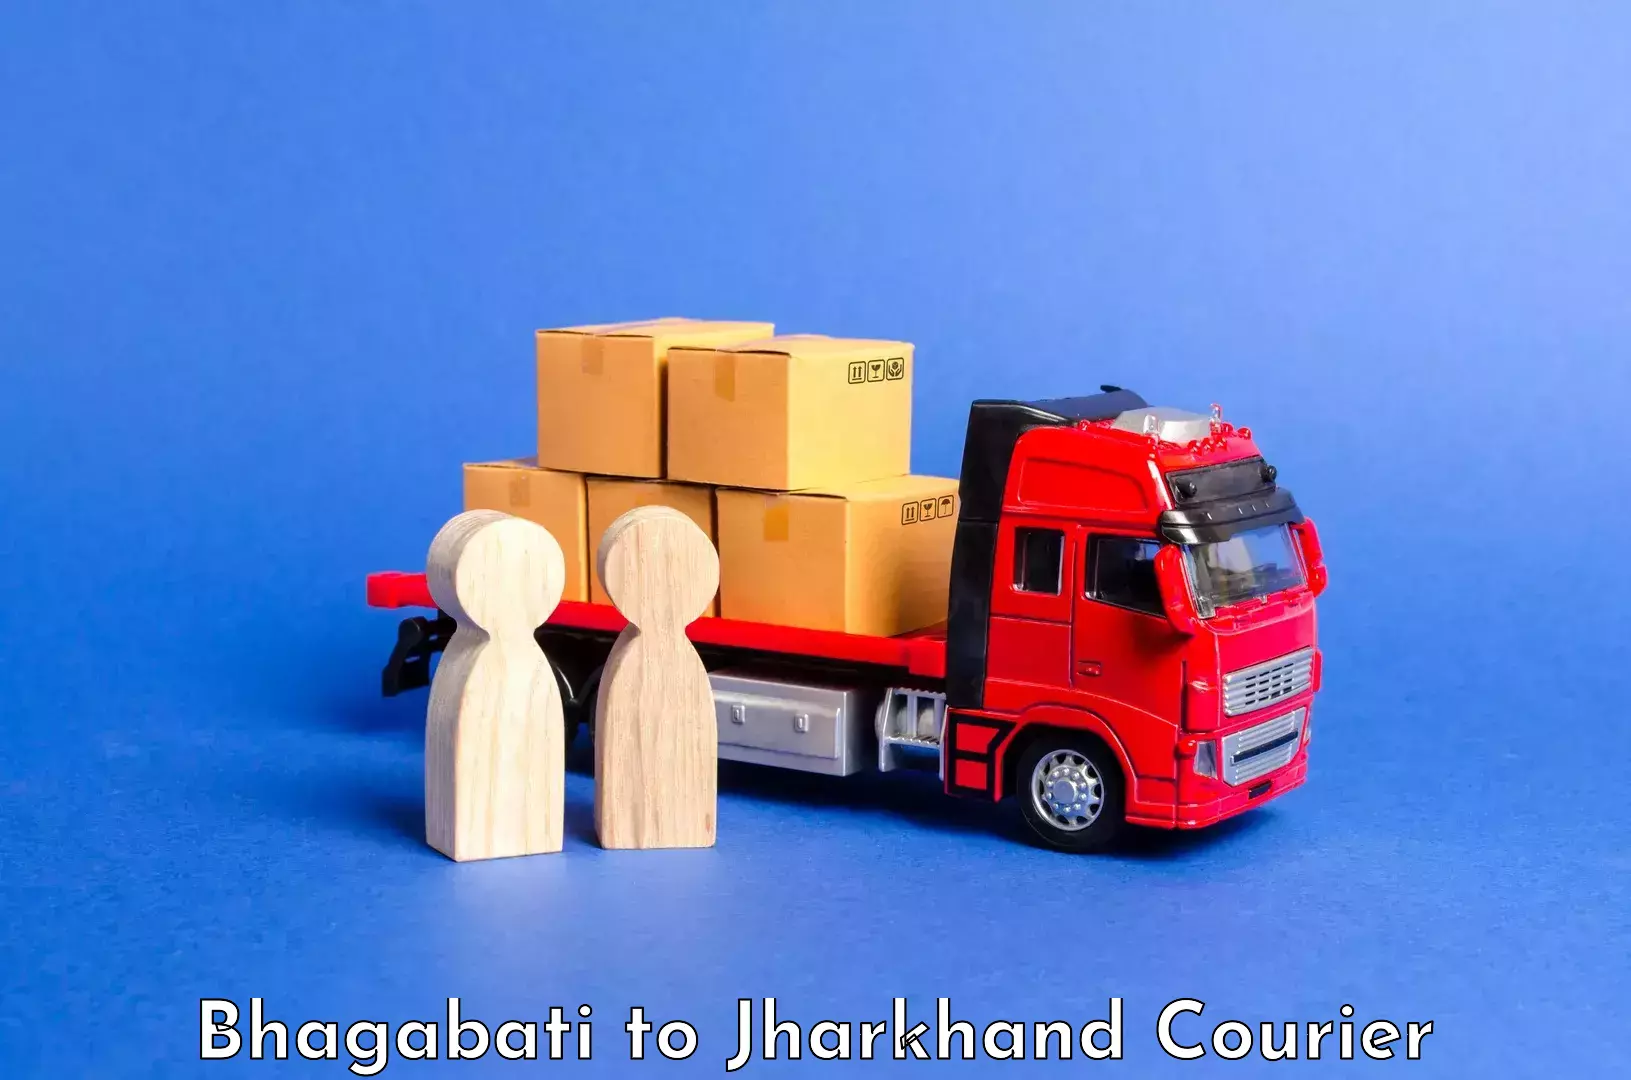 Luggage storage and delivery Bhagabati to Jharkhand